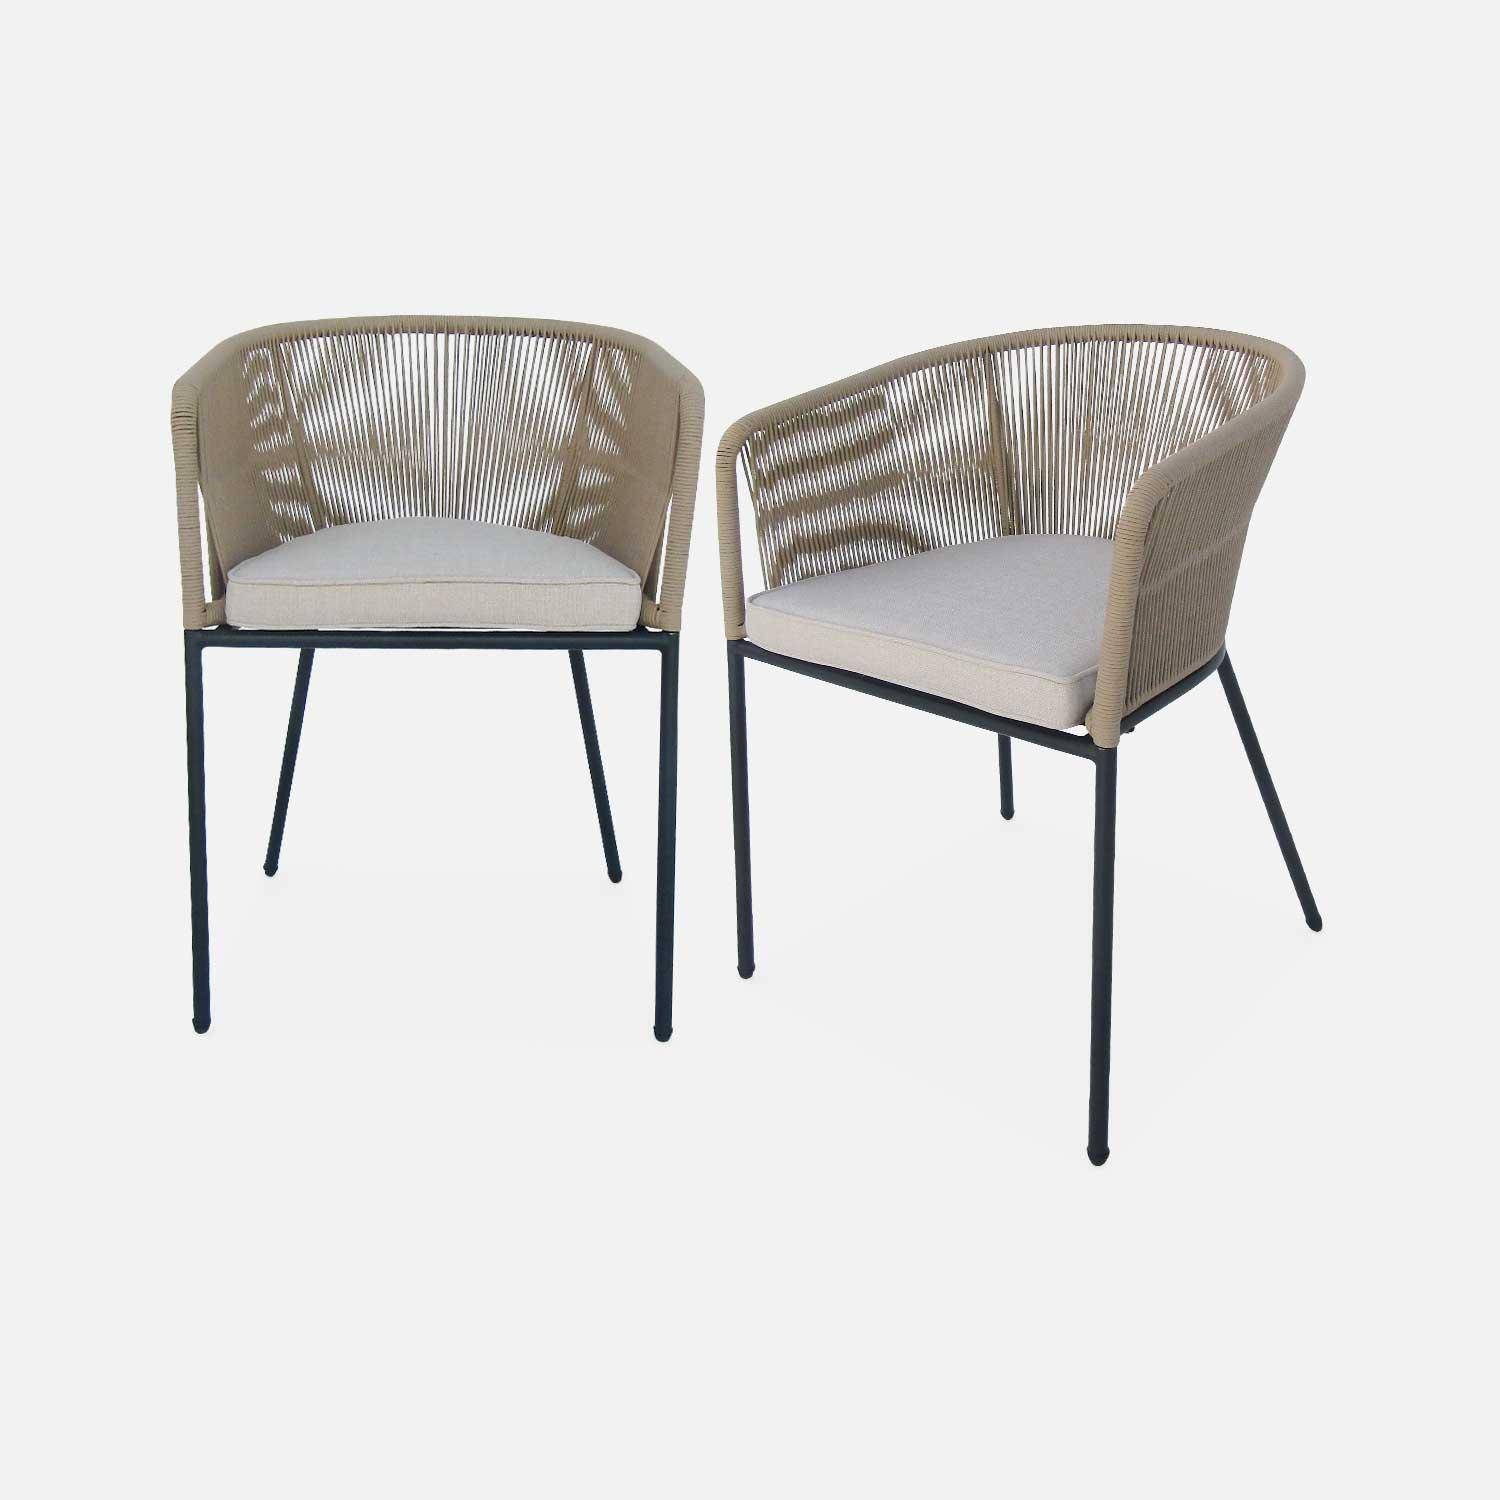 Pair of garden armchairs with rope and galvanised steel, black and beige Photo3